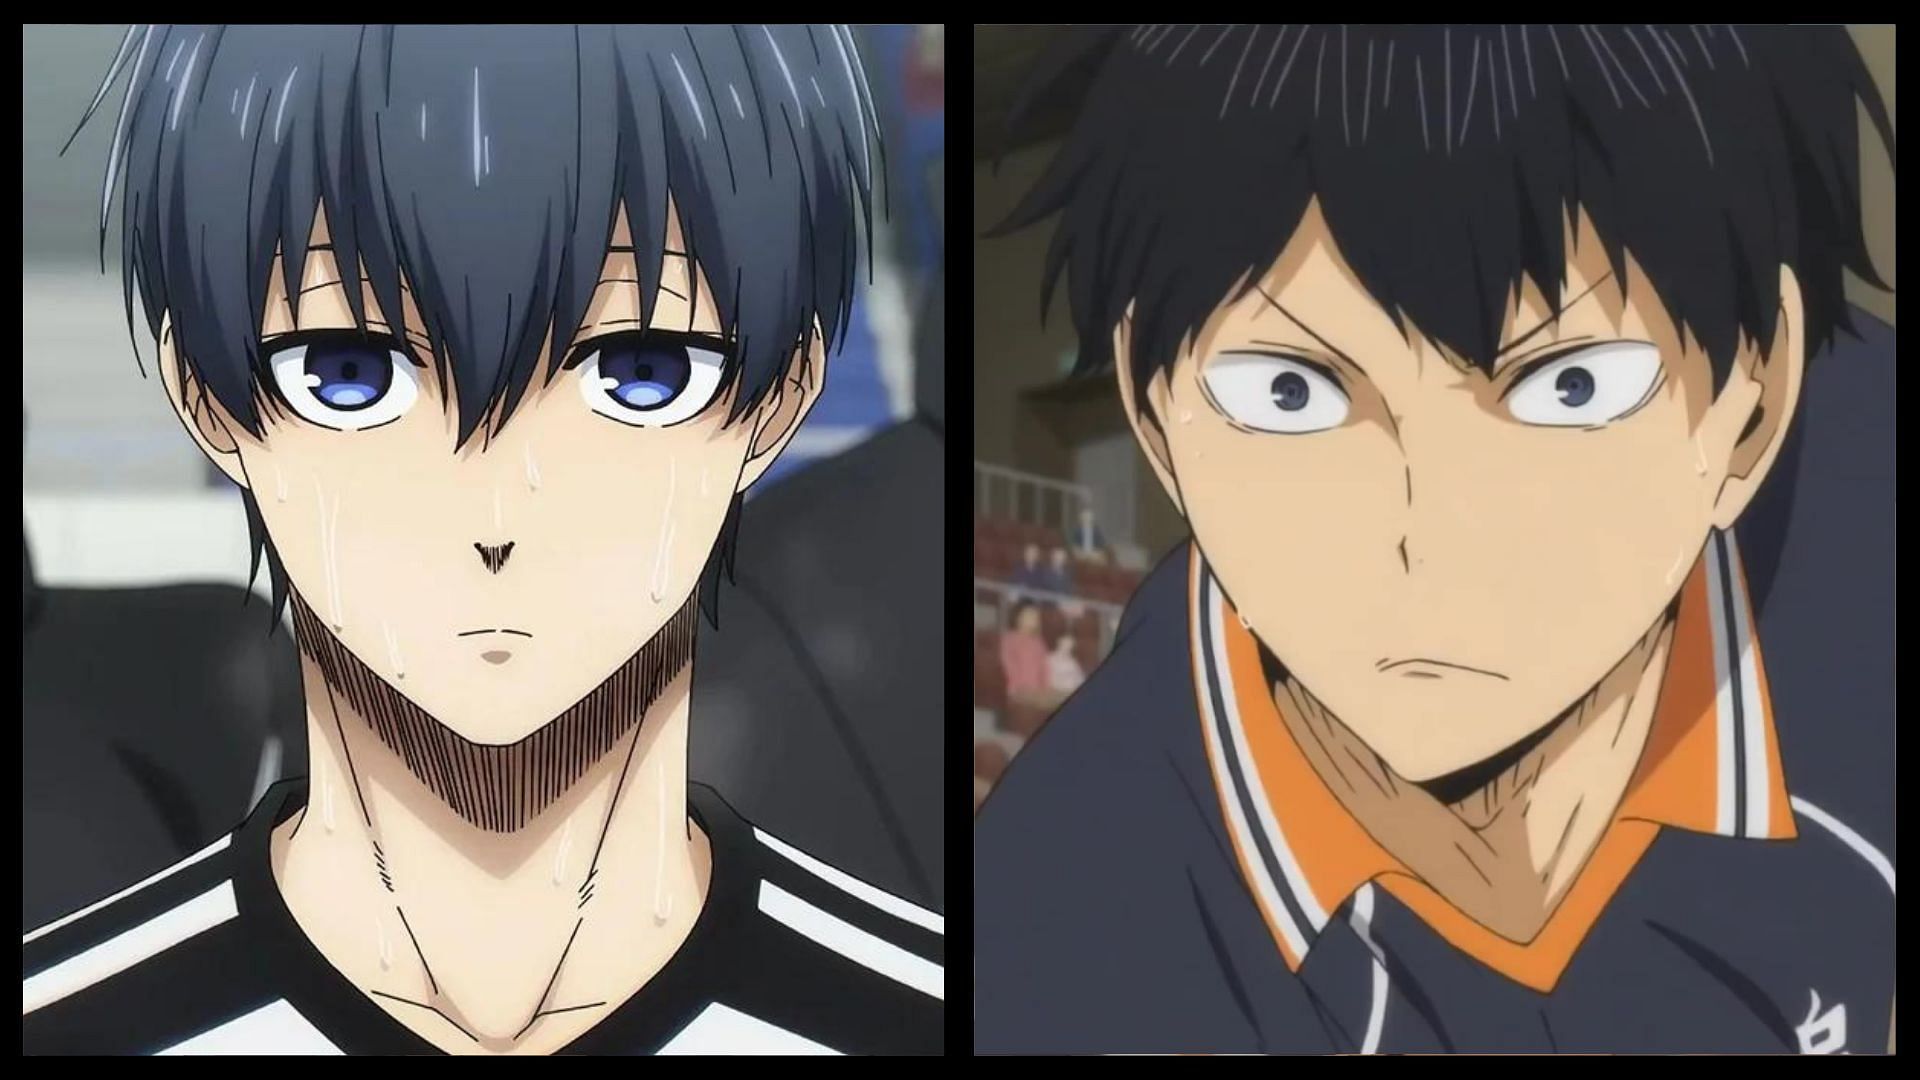 Yoichi Isaki and Tobio Kageyama both lost in the prefectural finals (Image via 8bit, Production IG)